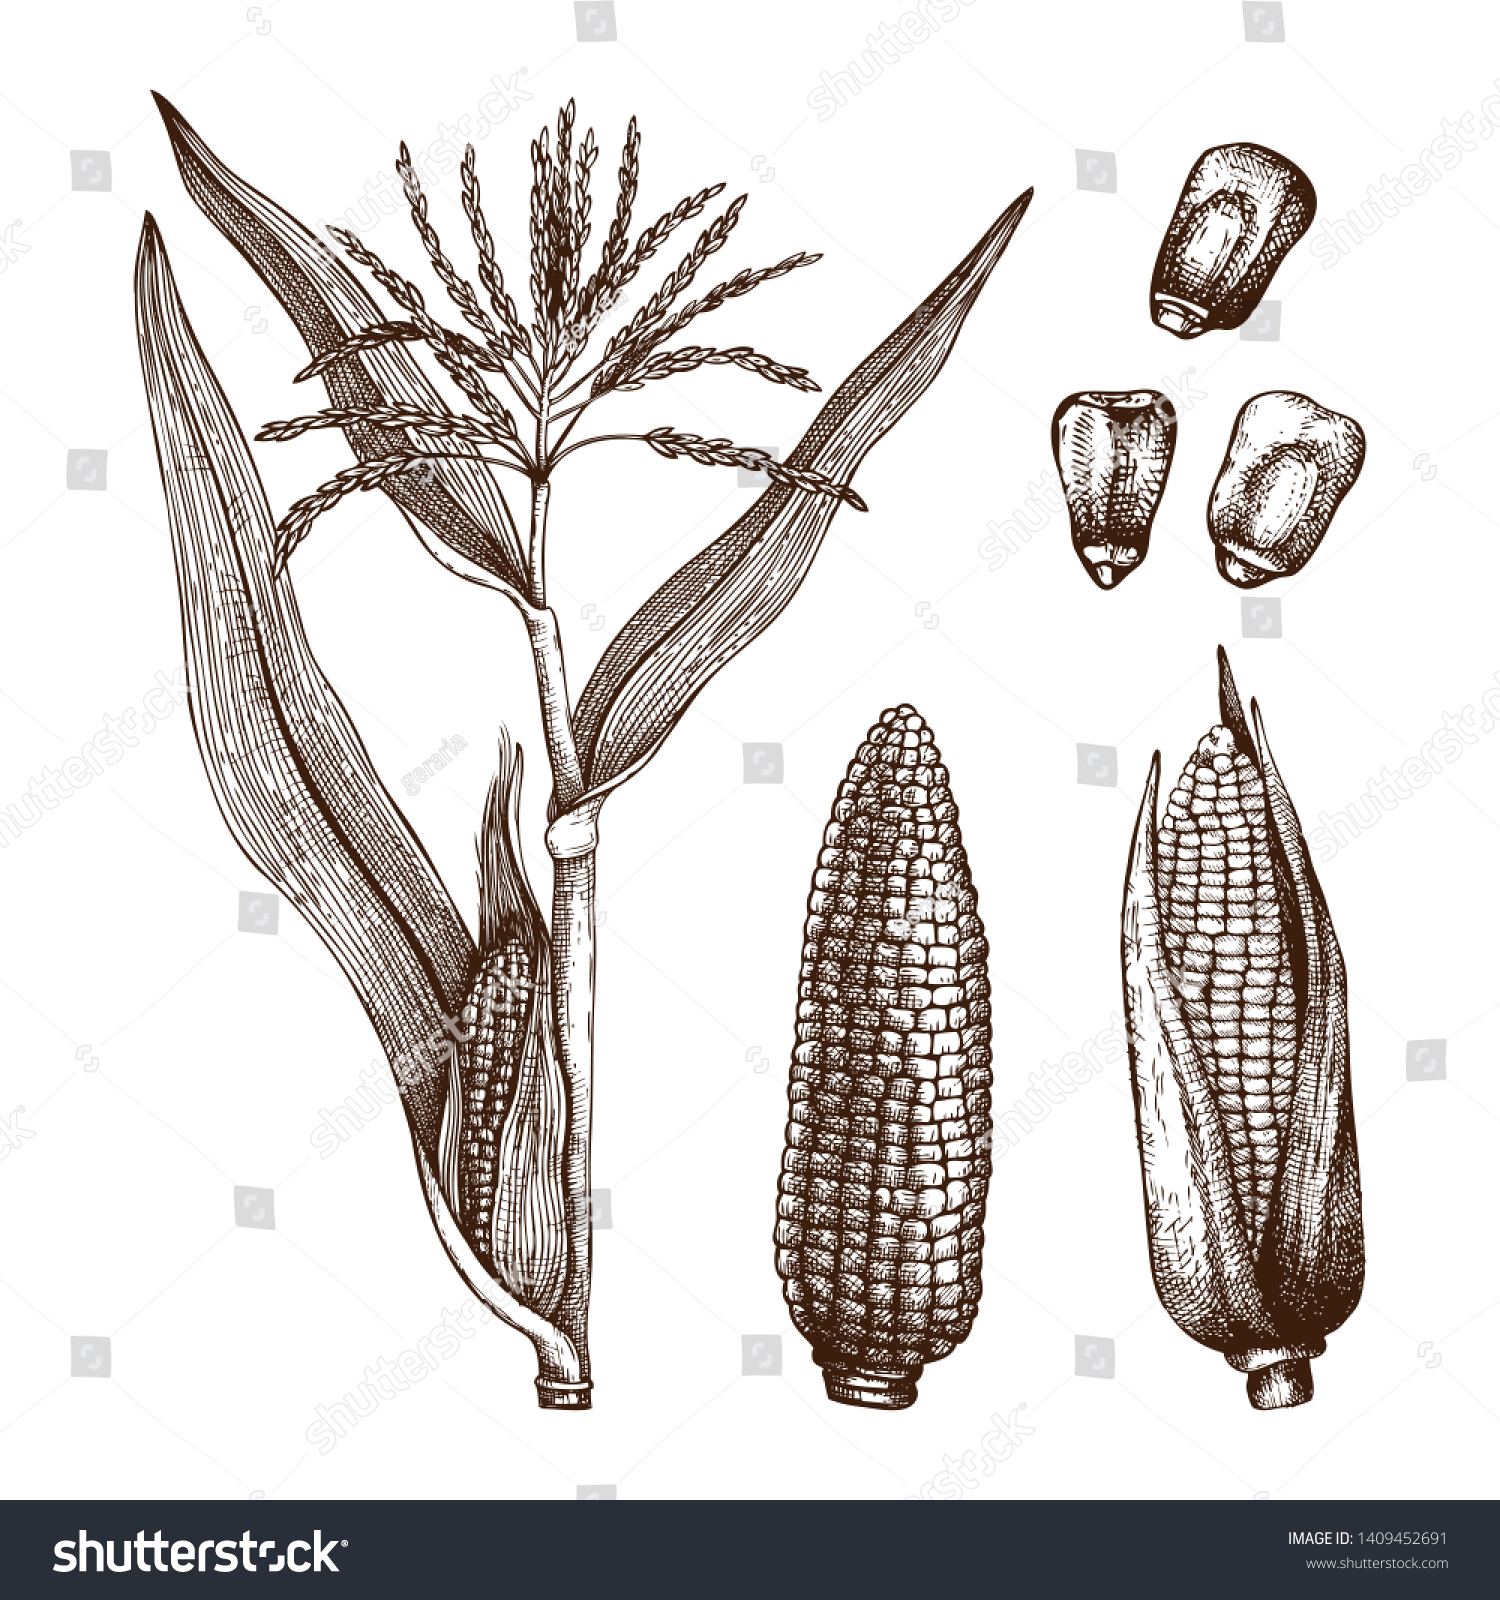 Hand drawn corn illustration. Vector maize sketches set. With Maize plant, corn cob and grains. Botanical drawing of vintage cereal plants drawing. Great for packaging, menu, label. High detailed. #1409452691